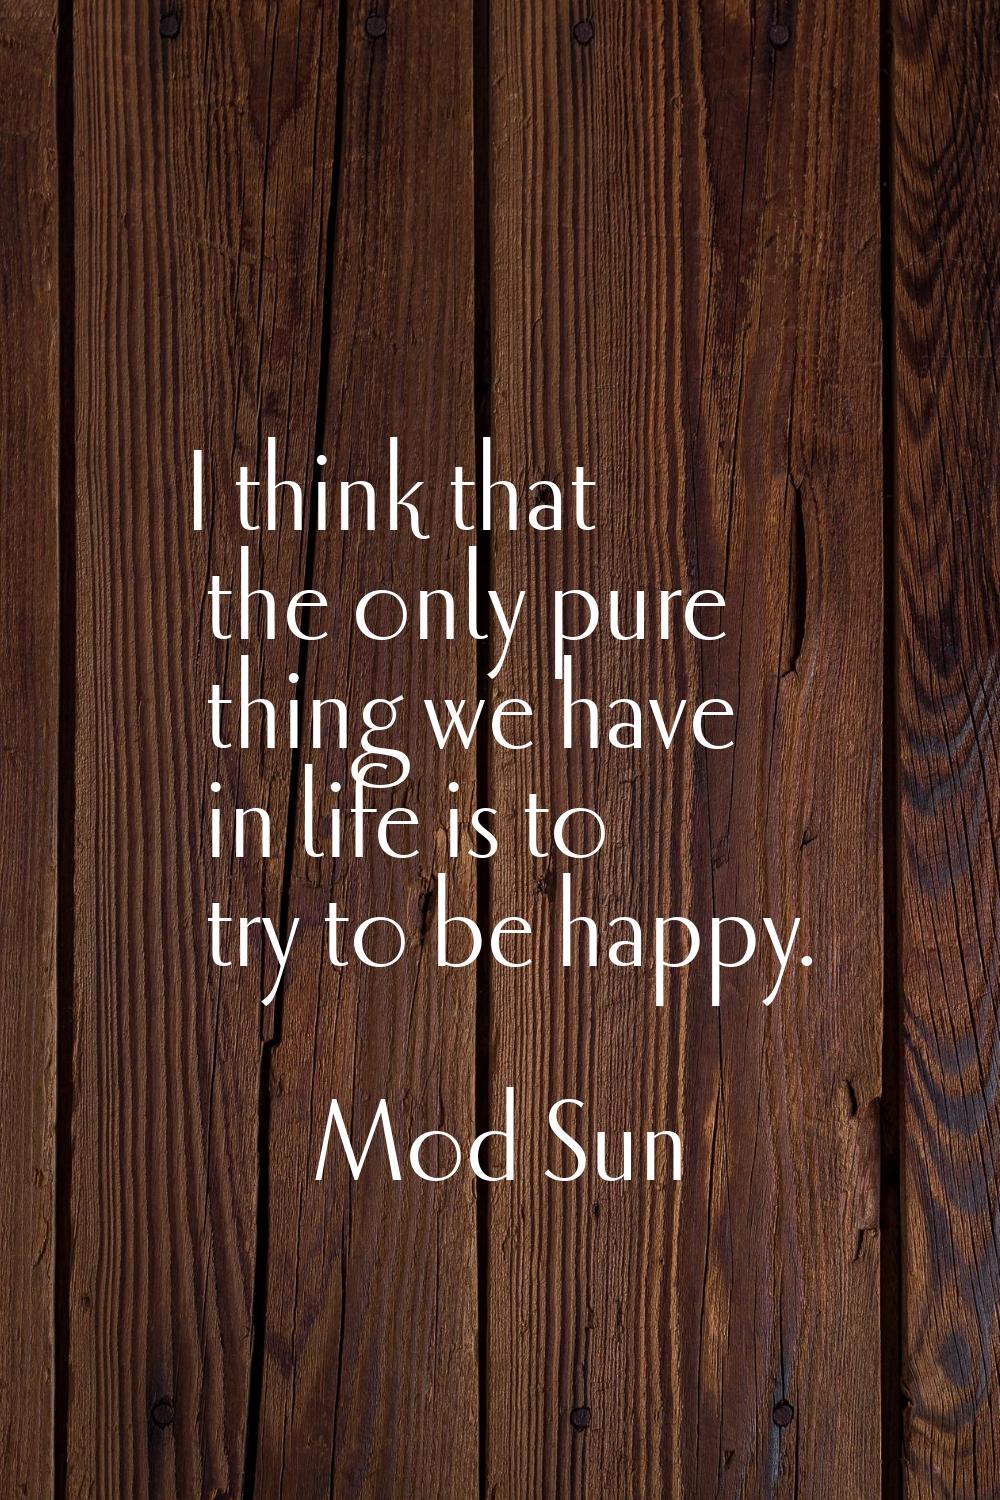 I think that the only pure thing we have in life is to try to be happy.